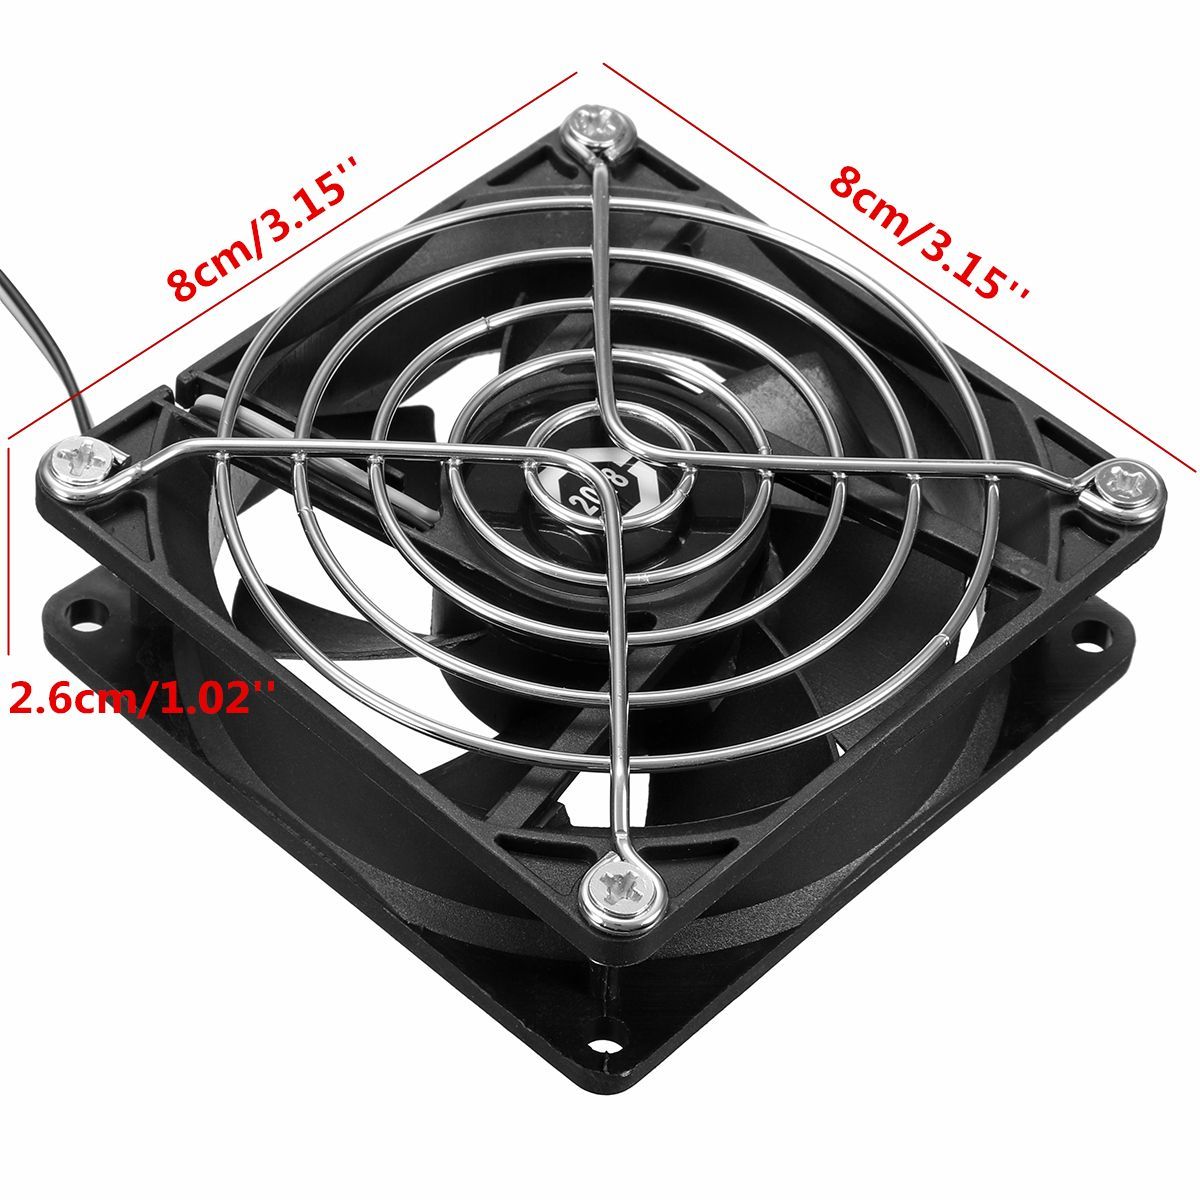 8cm-USB-Cooling-Fan-Heatsink-for-PC-Computer-TV-Box-for-Xbox-for-PlayStation-Electronics-1301696